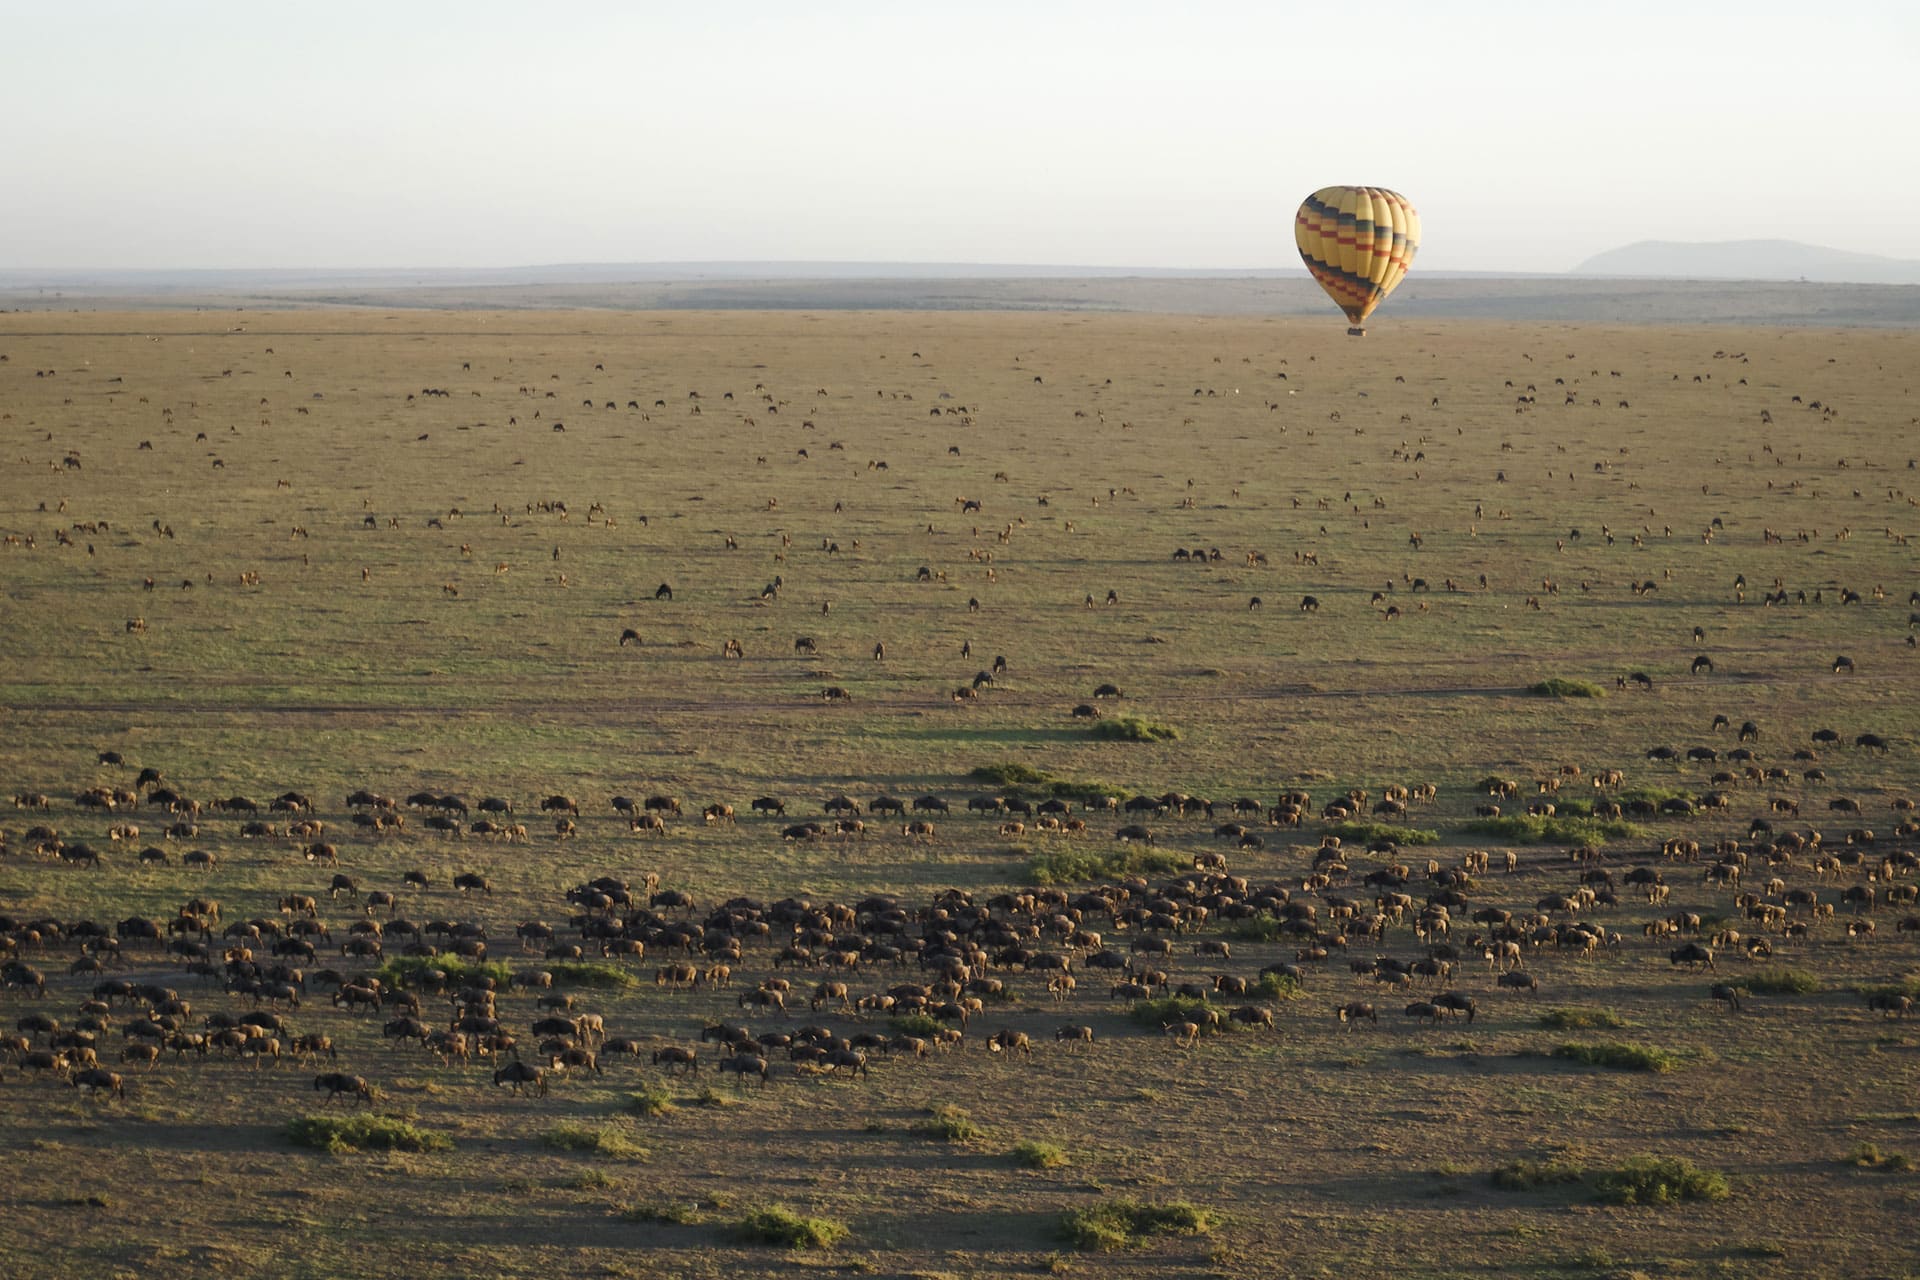 A hot air balloon safari over the plain of the Serengeti National Park in Tanzania – one of the top honeymoon destinations in Africa.